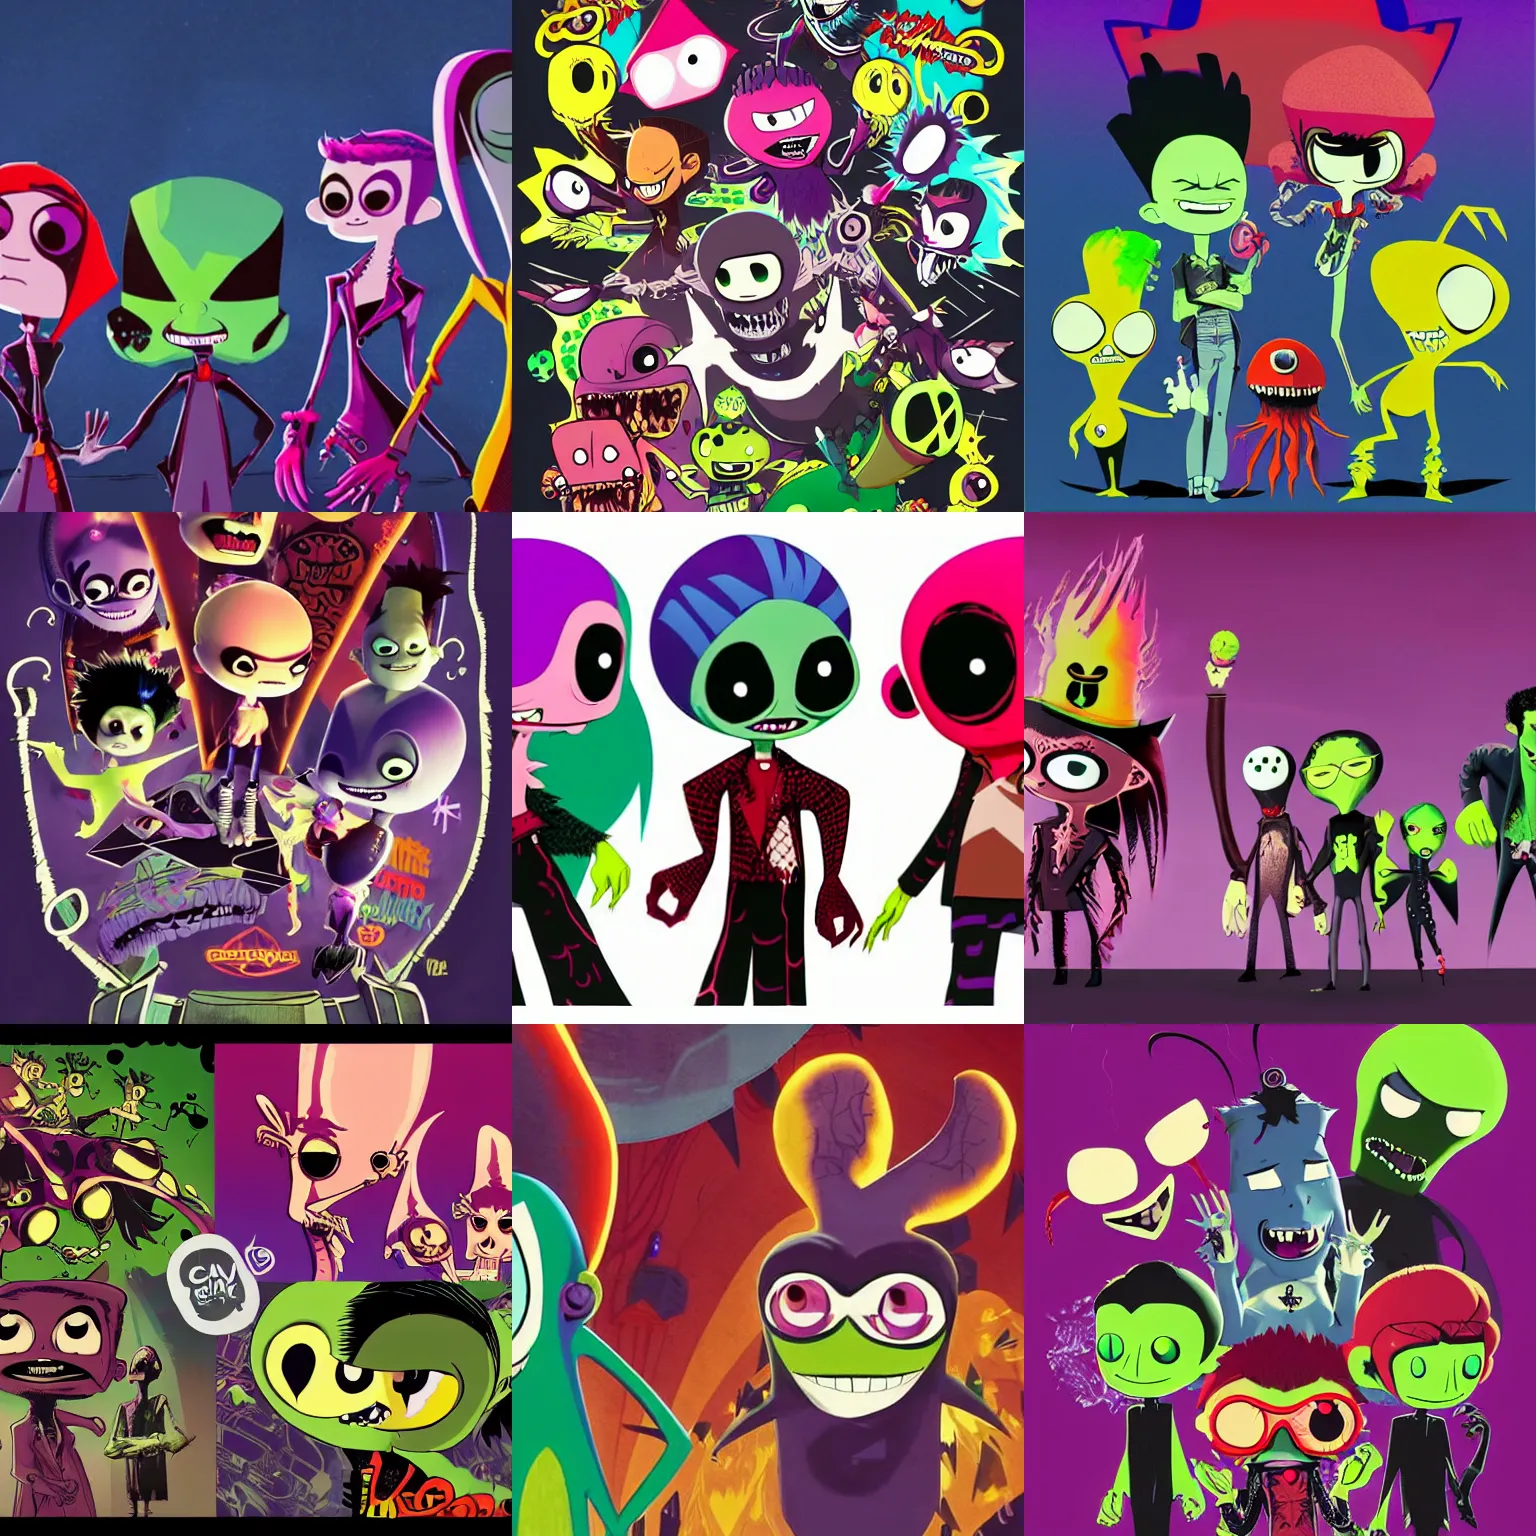 Prompt: psychic punk rocker vampiric electrifying rockstar vampire squid concept character designs of various shapes and sizes by genndy tartakovsky and rad sechrist and Jamie Hewlett from gorrilaz and splatoon by nintendo and the psychonauts franchise by doublefine tim shafer artists for the new hotel transylvania film